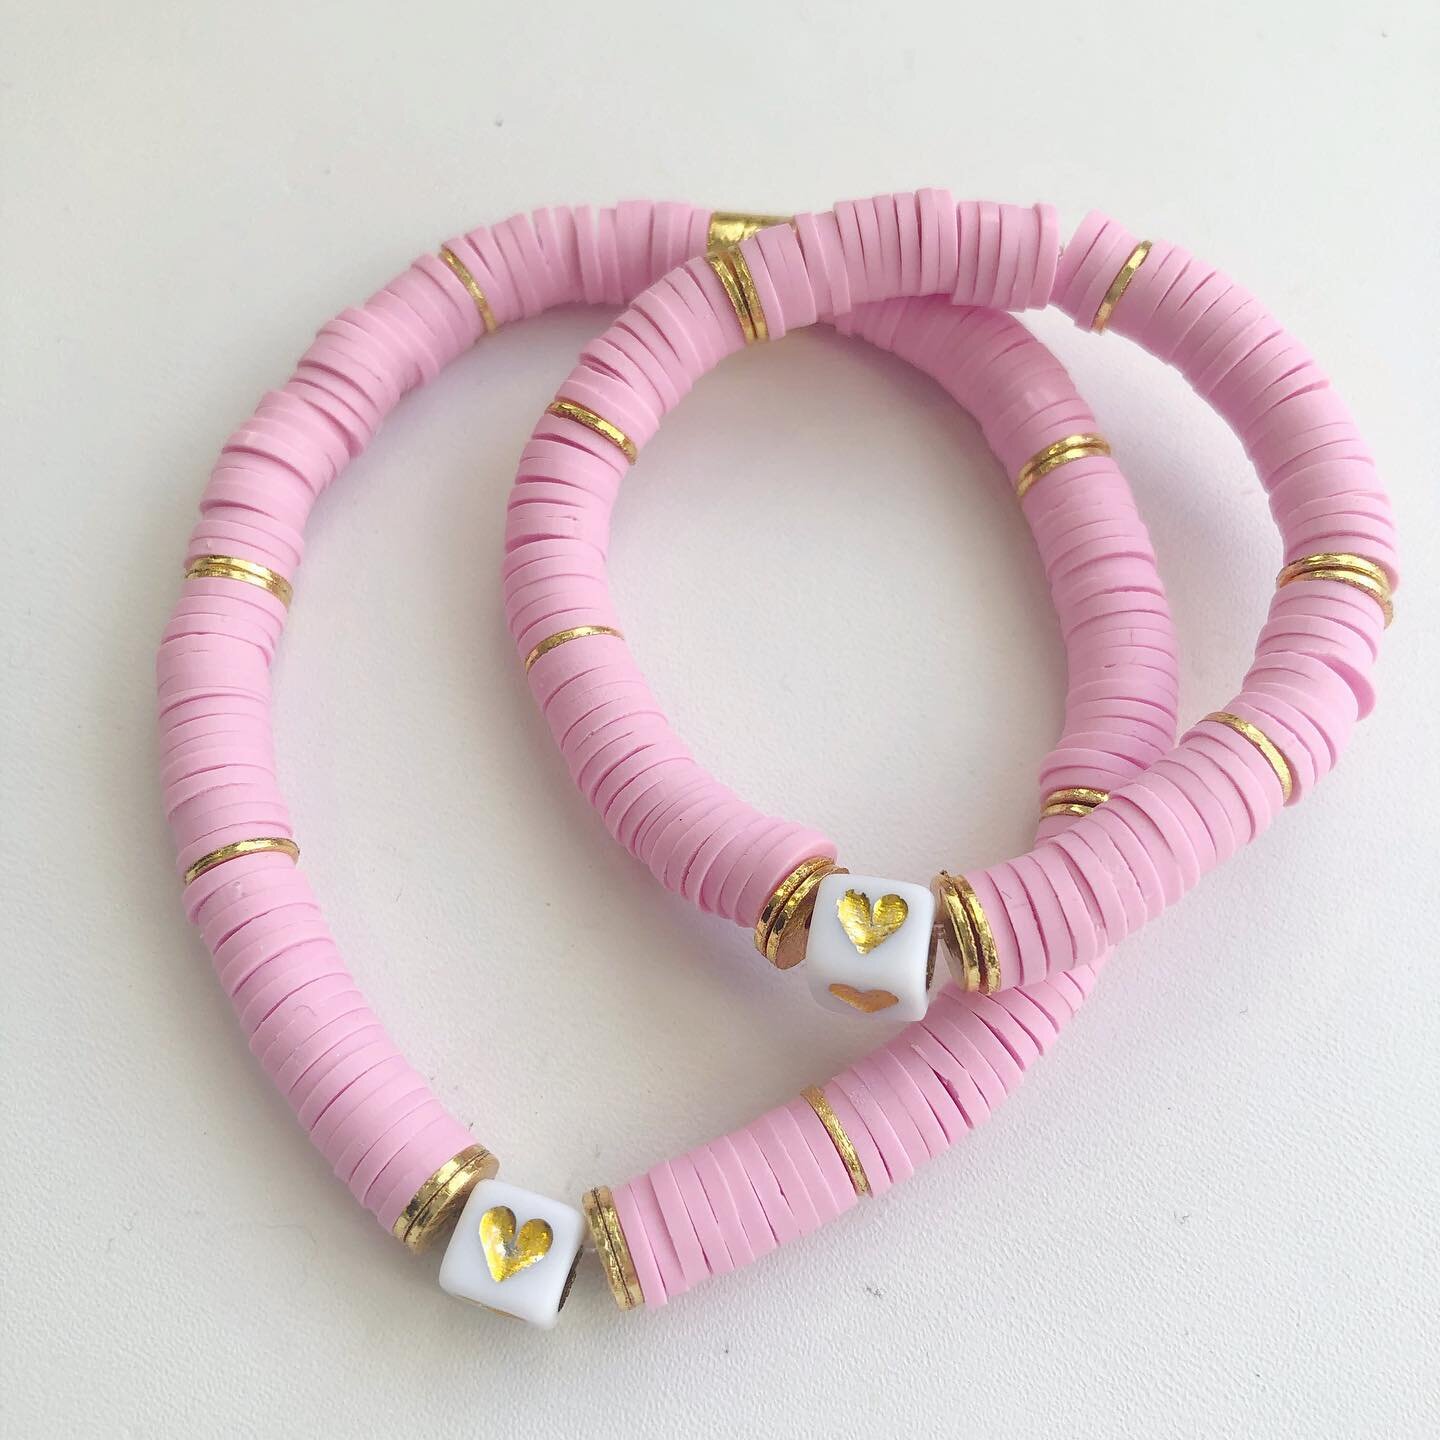 Mommy and me matching Valentine&rsquo;s Bracelets! Match with your little. Set includes one adult stretchy heart bracelet and one child&rsquo;s size. This is a PREORDER with all orders shipping this Monday. $30 for the set. To purchase, comment sold.